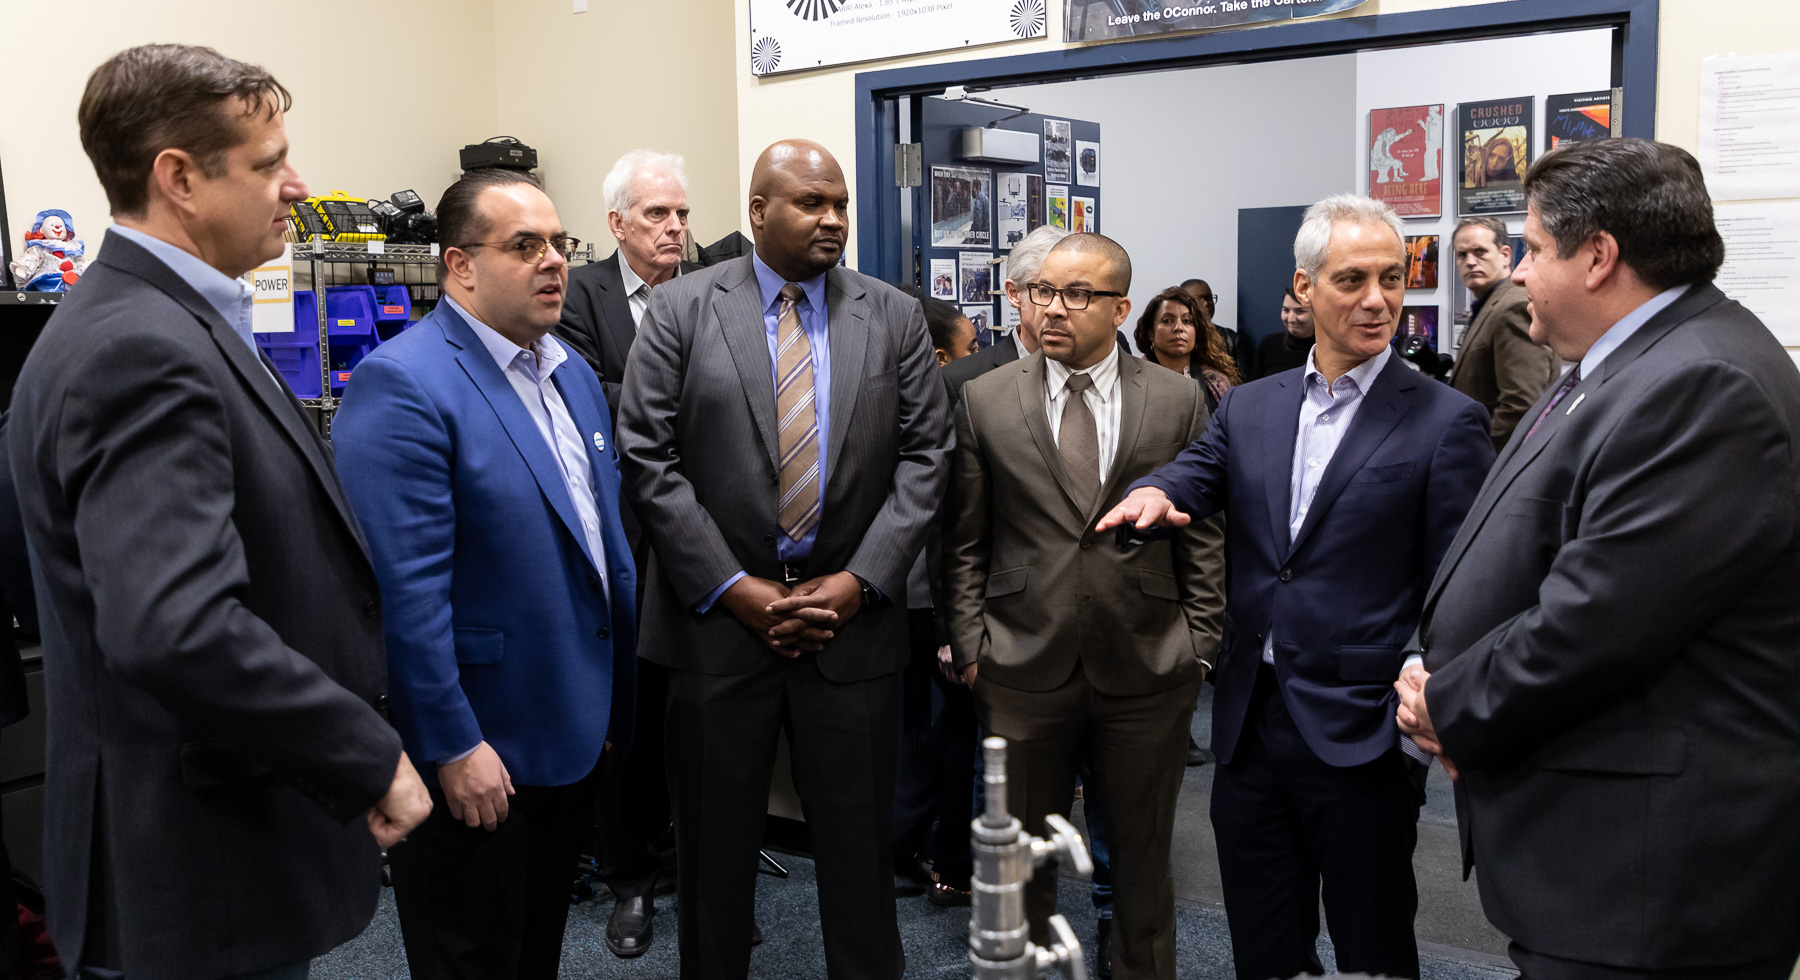 Left to right, John Corba, Alex Pissios, Elgie R. Sims, Jr. (D-Chicago), Ald. Michael Scott Jr. (24th), Chicago Mayor Rahm Emanuel and Illinois Governor JB Pritzker visit Cinespace Chicago Film Studios and DePaul University’s School of Cinematic Arts, Thursday, Feb. 28, 2019, to discuss the growth of Illinois’ film, TV and media industry. (DePaul University/Jeff Carrion)